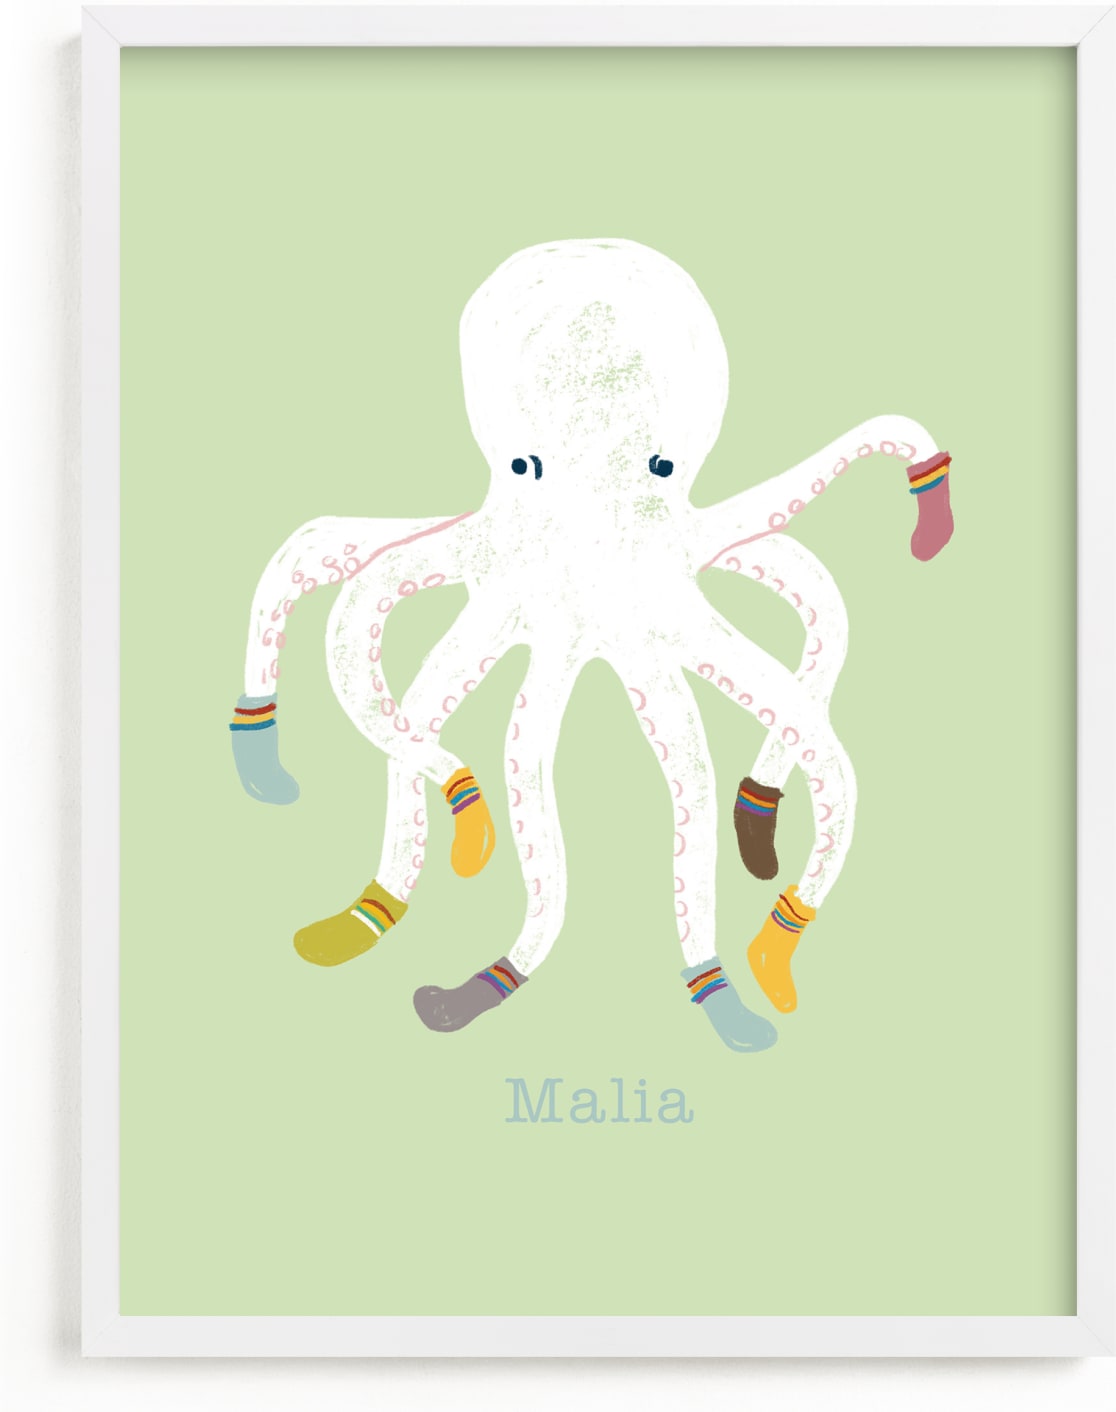 This is a green personalized art for kid by Celeste Duffy called Socktopus.